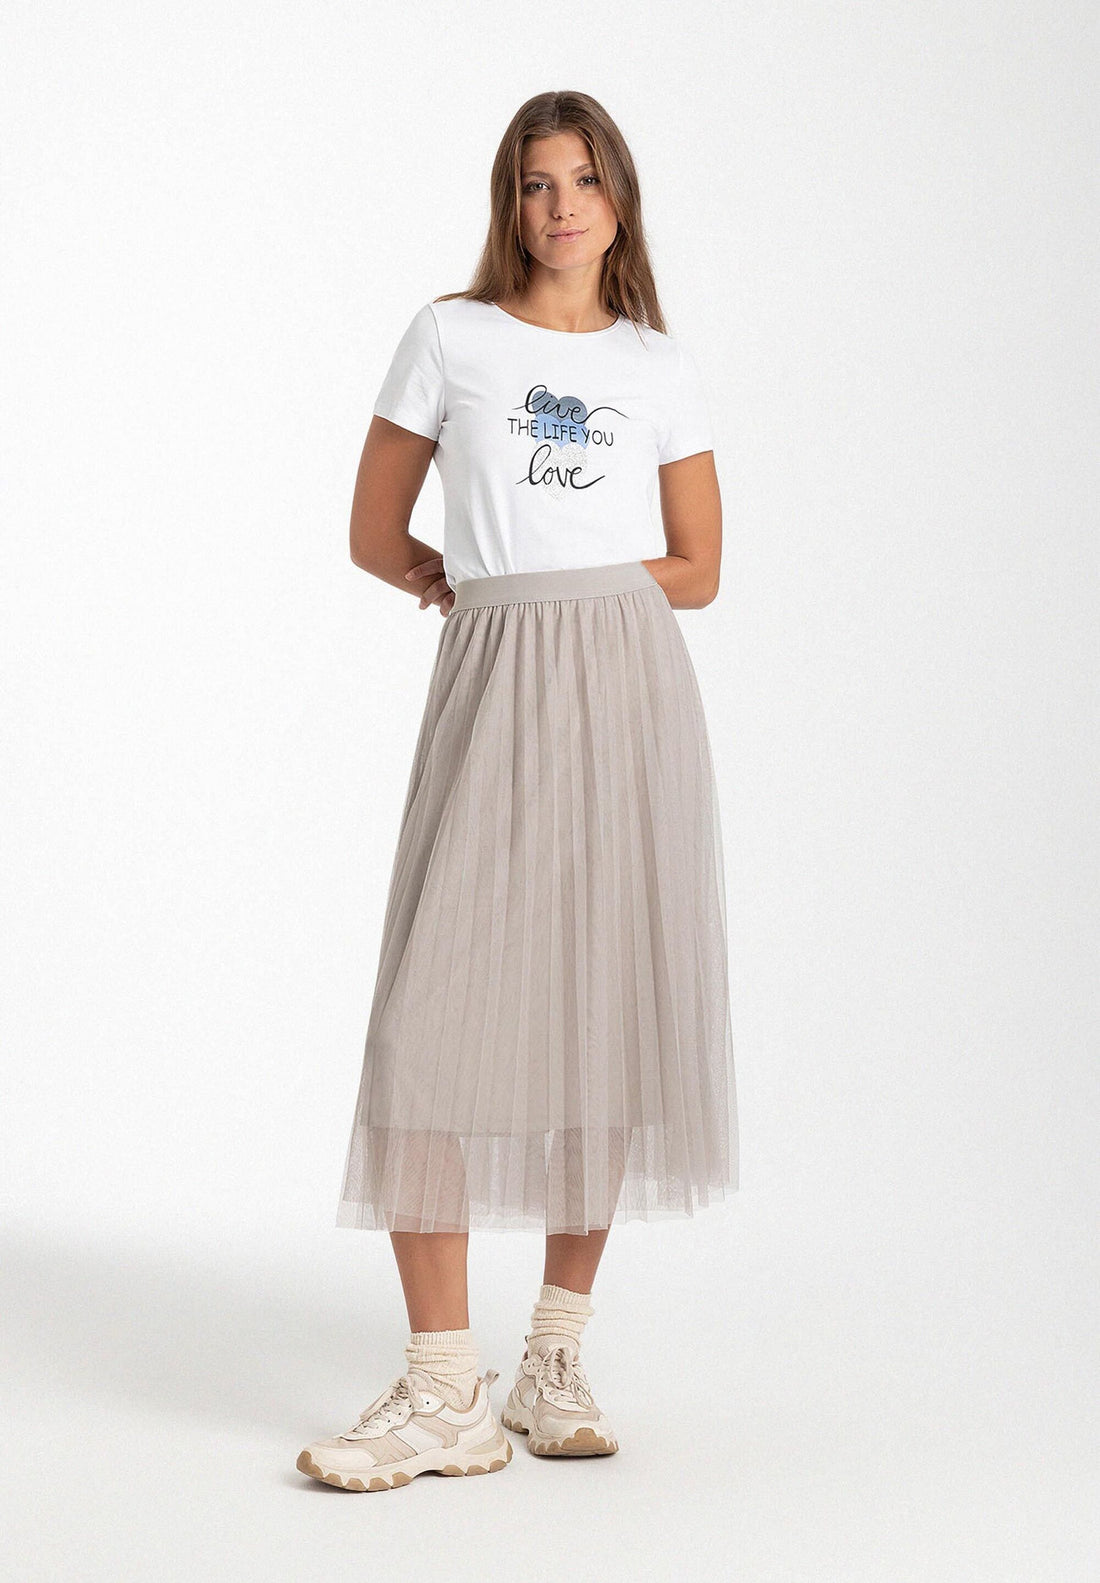 T-Shirt With Front Print, White, Autumn Collection_31090011_0010_02